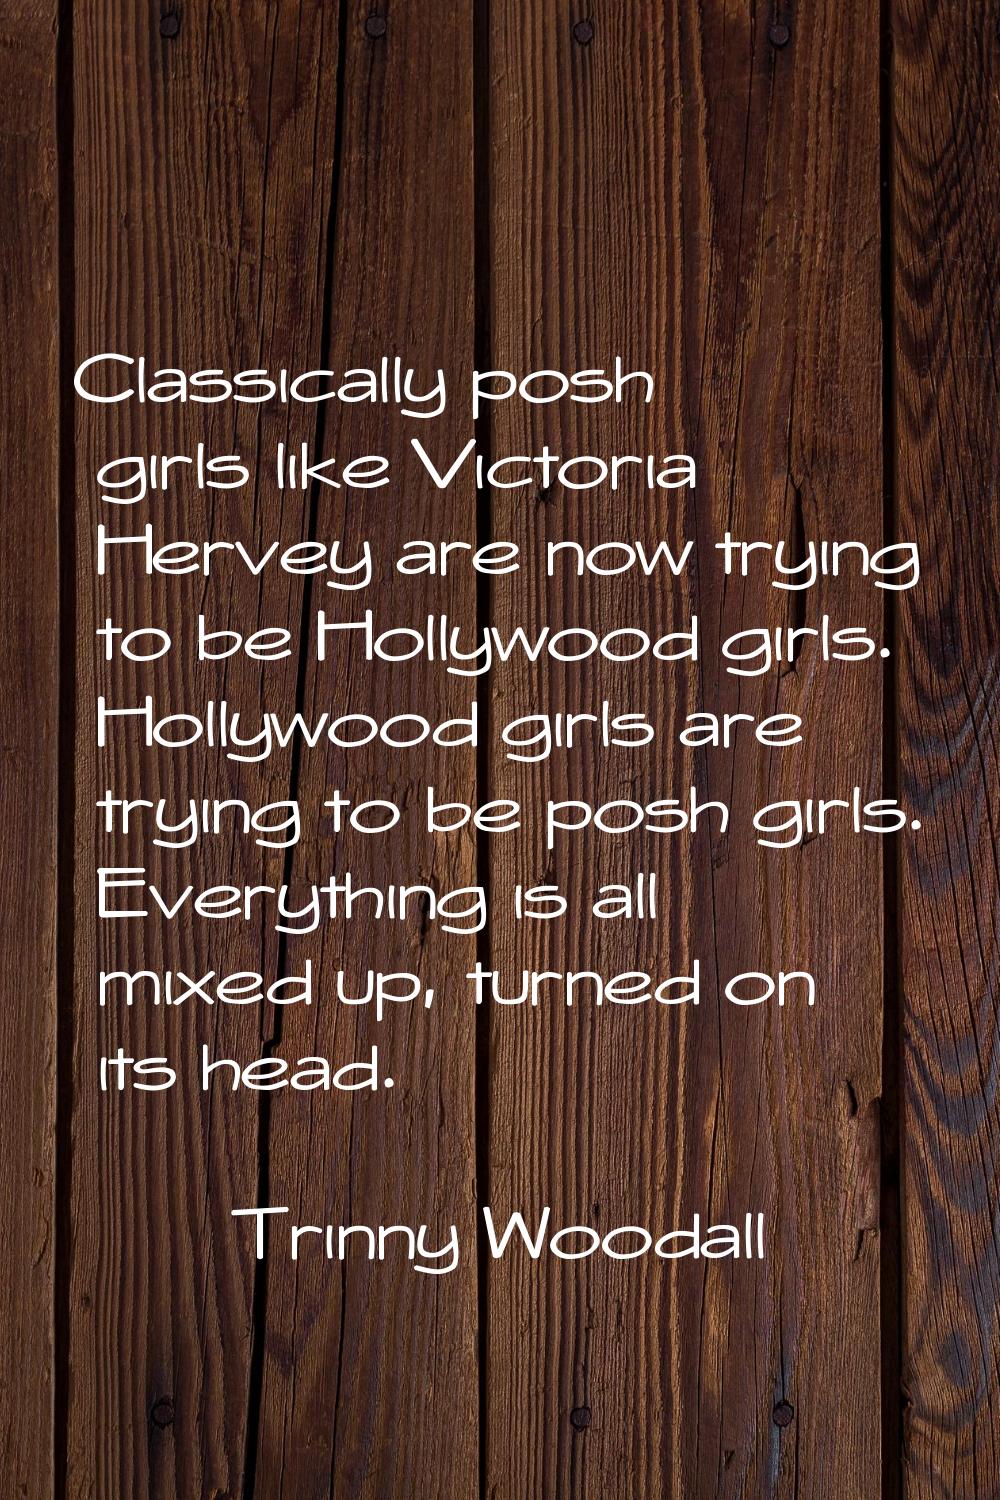 Classically posh girls like Victoria Hervey are now trying to be Hollywood girls. Hollywood girls a